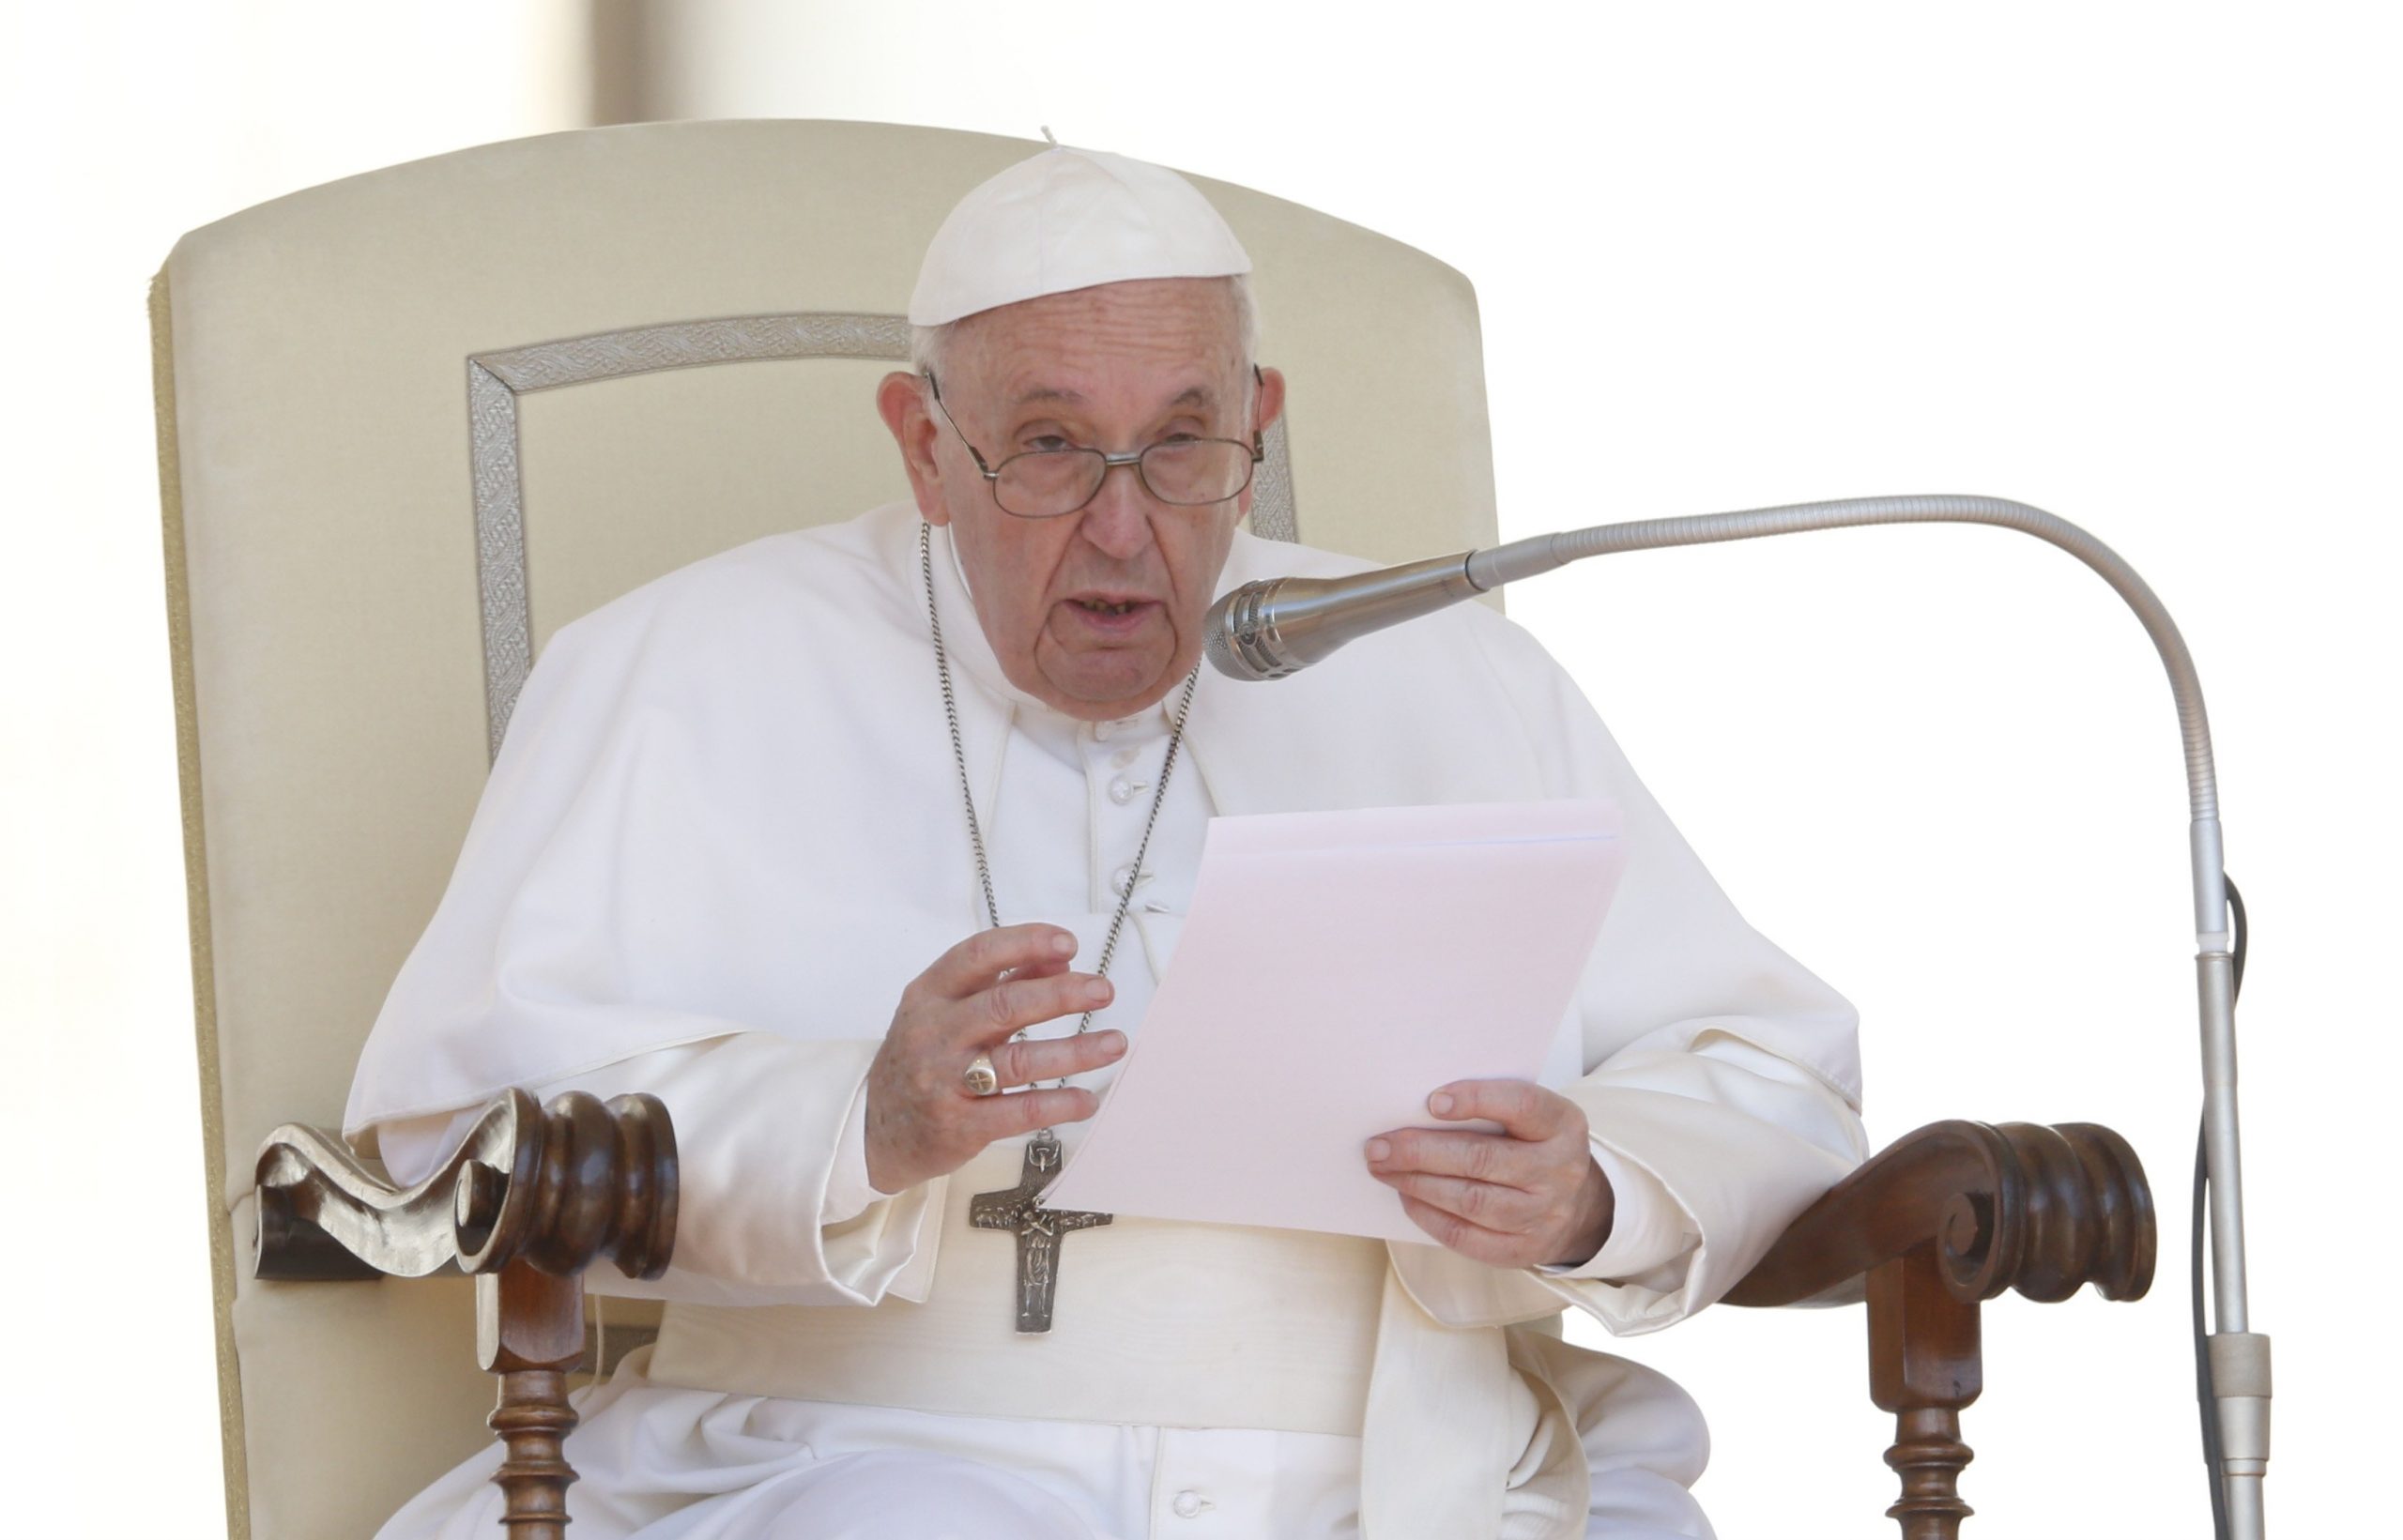 nuttet tyv sagtmodighed Shame on those who take advantage of the elderly, ill, pope says – Diocese  of Scranton